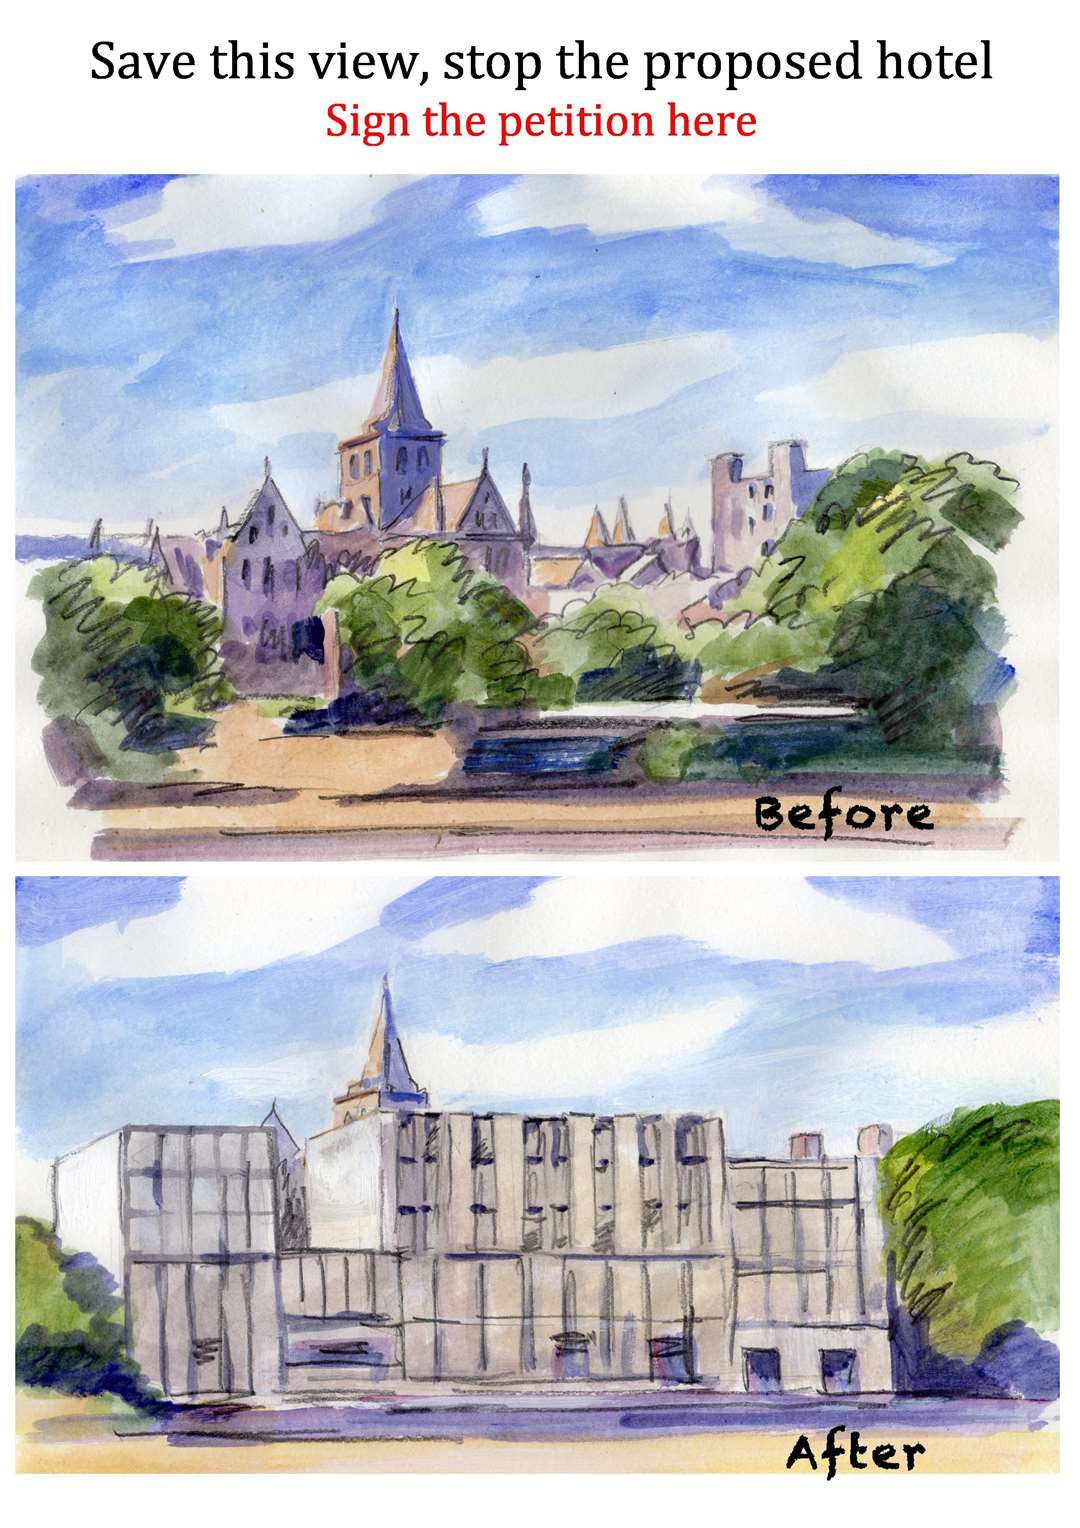 Artist Simon Mills' before and after impressions